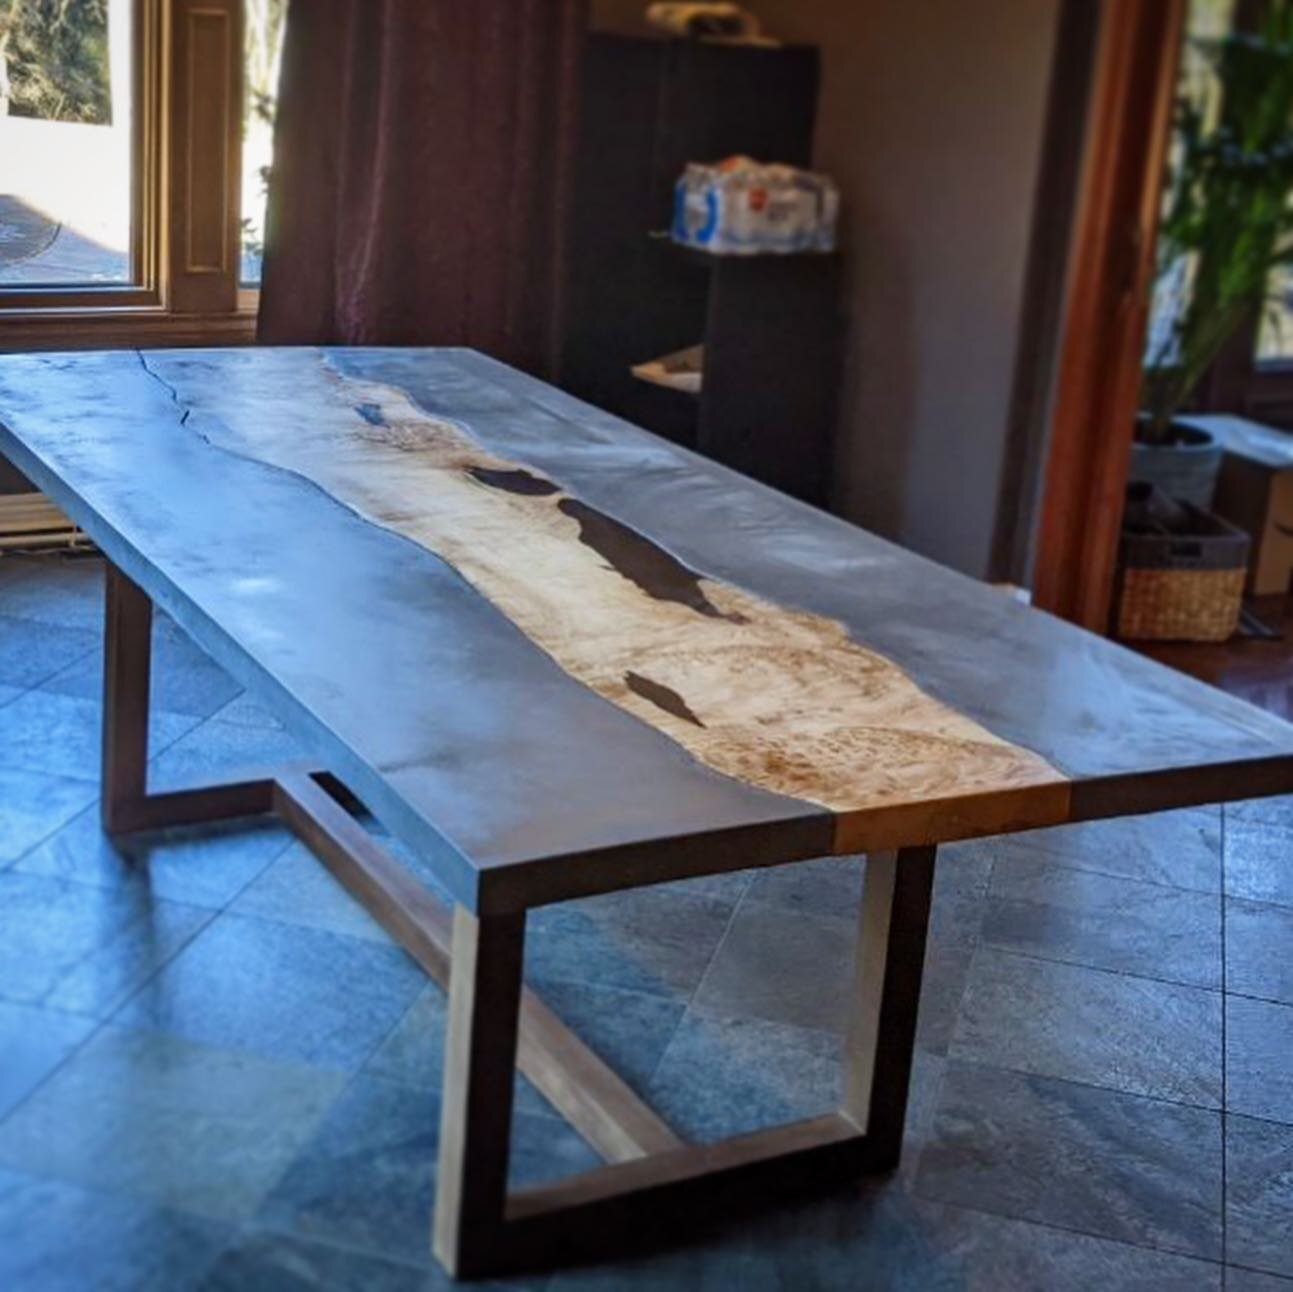 Custom concrete and live edge dining table made its way across the country to its new home! #custom #custommade #customfurniture #furniture #furnituredesign #design #interiordesign #table #luxury #artisan #artist #art #diningroom #etsy #woodwork #woo